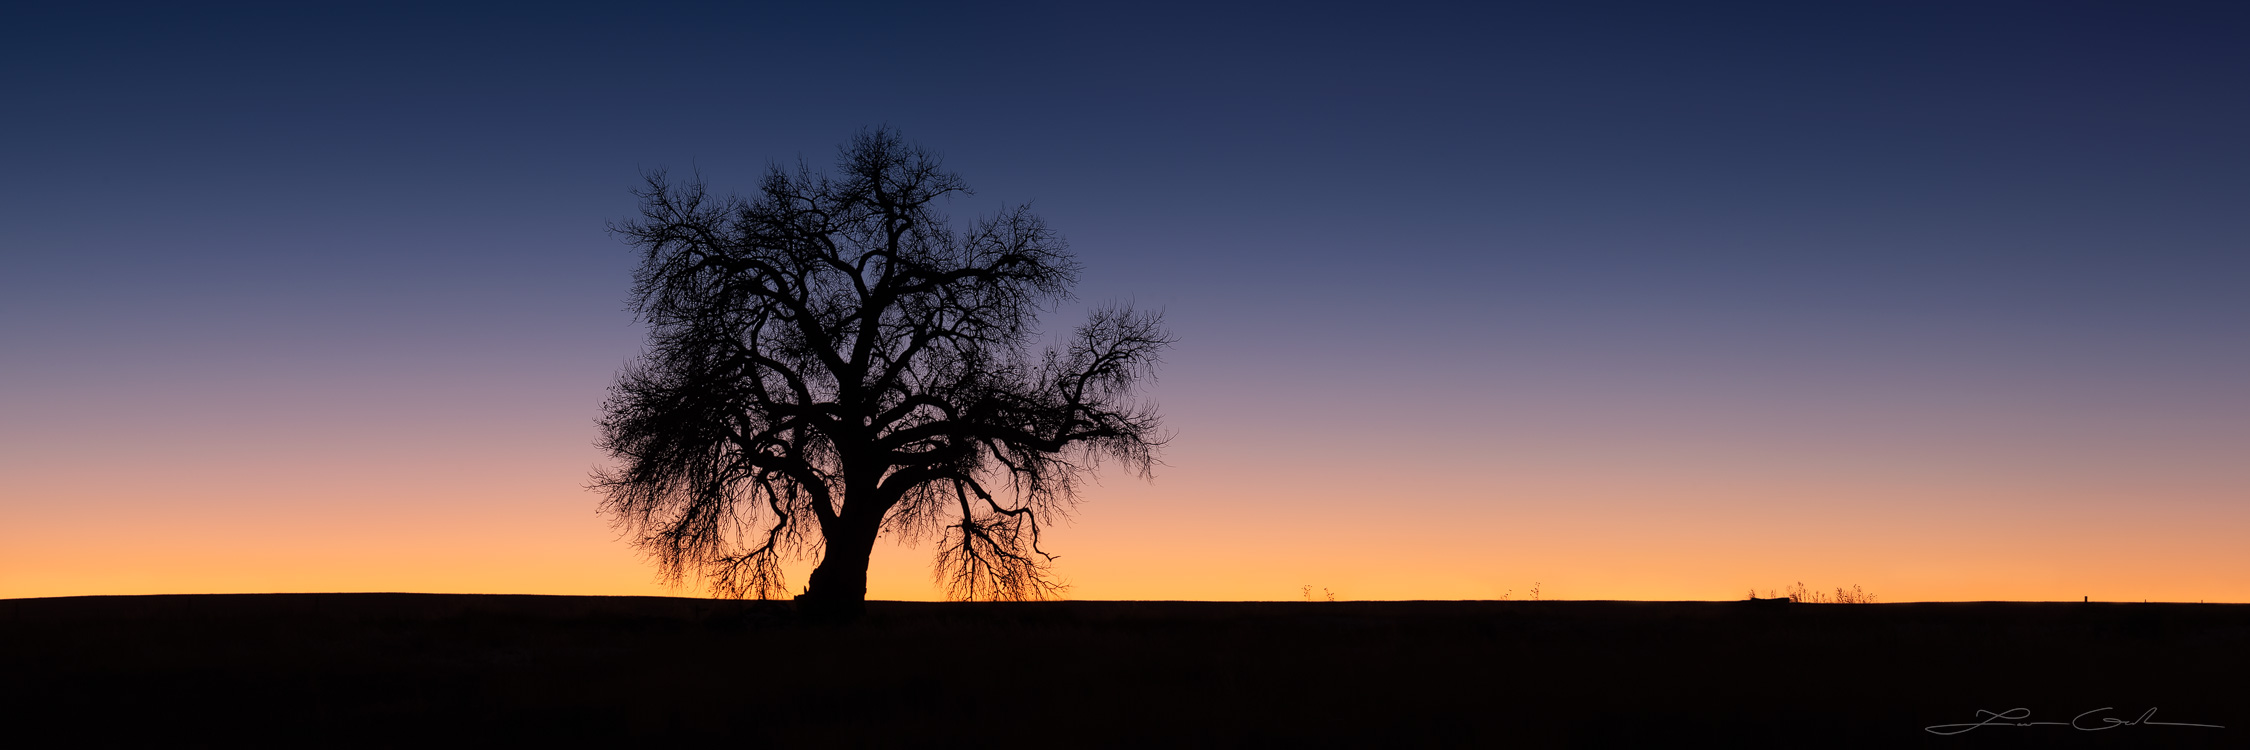 Solitary cottonwood tree silhouette in twilight